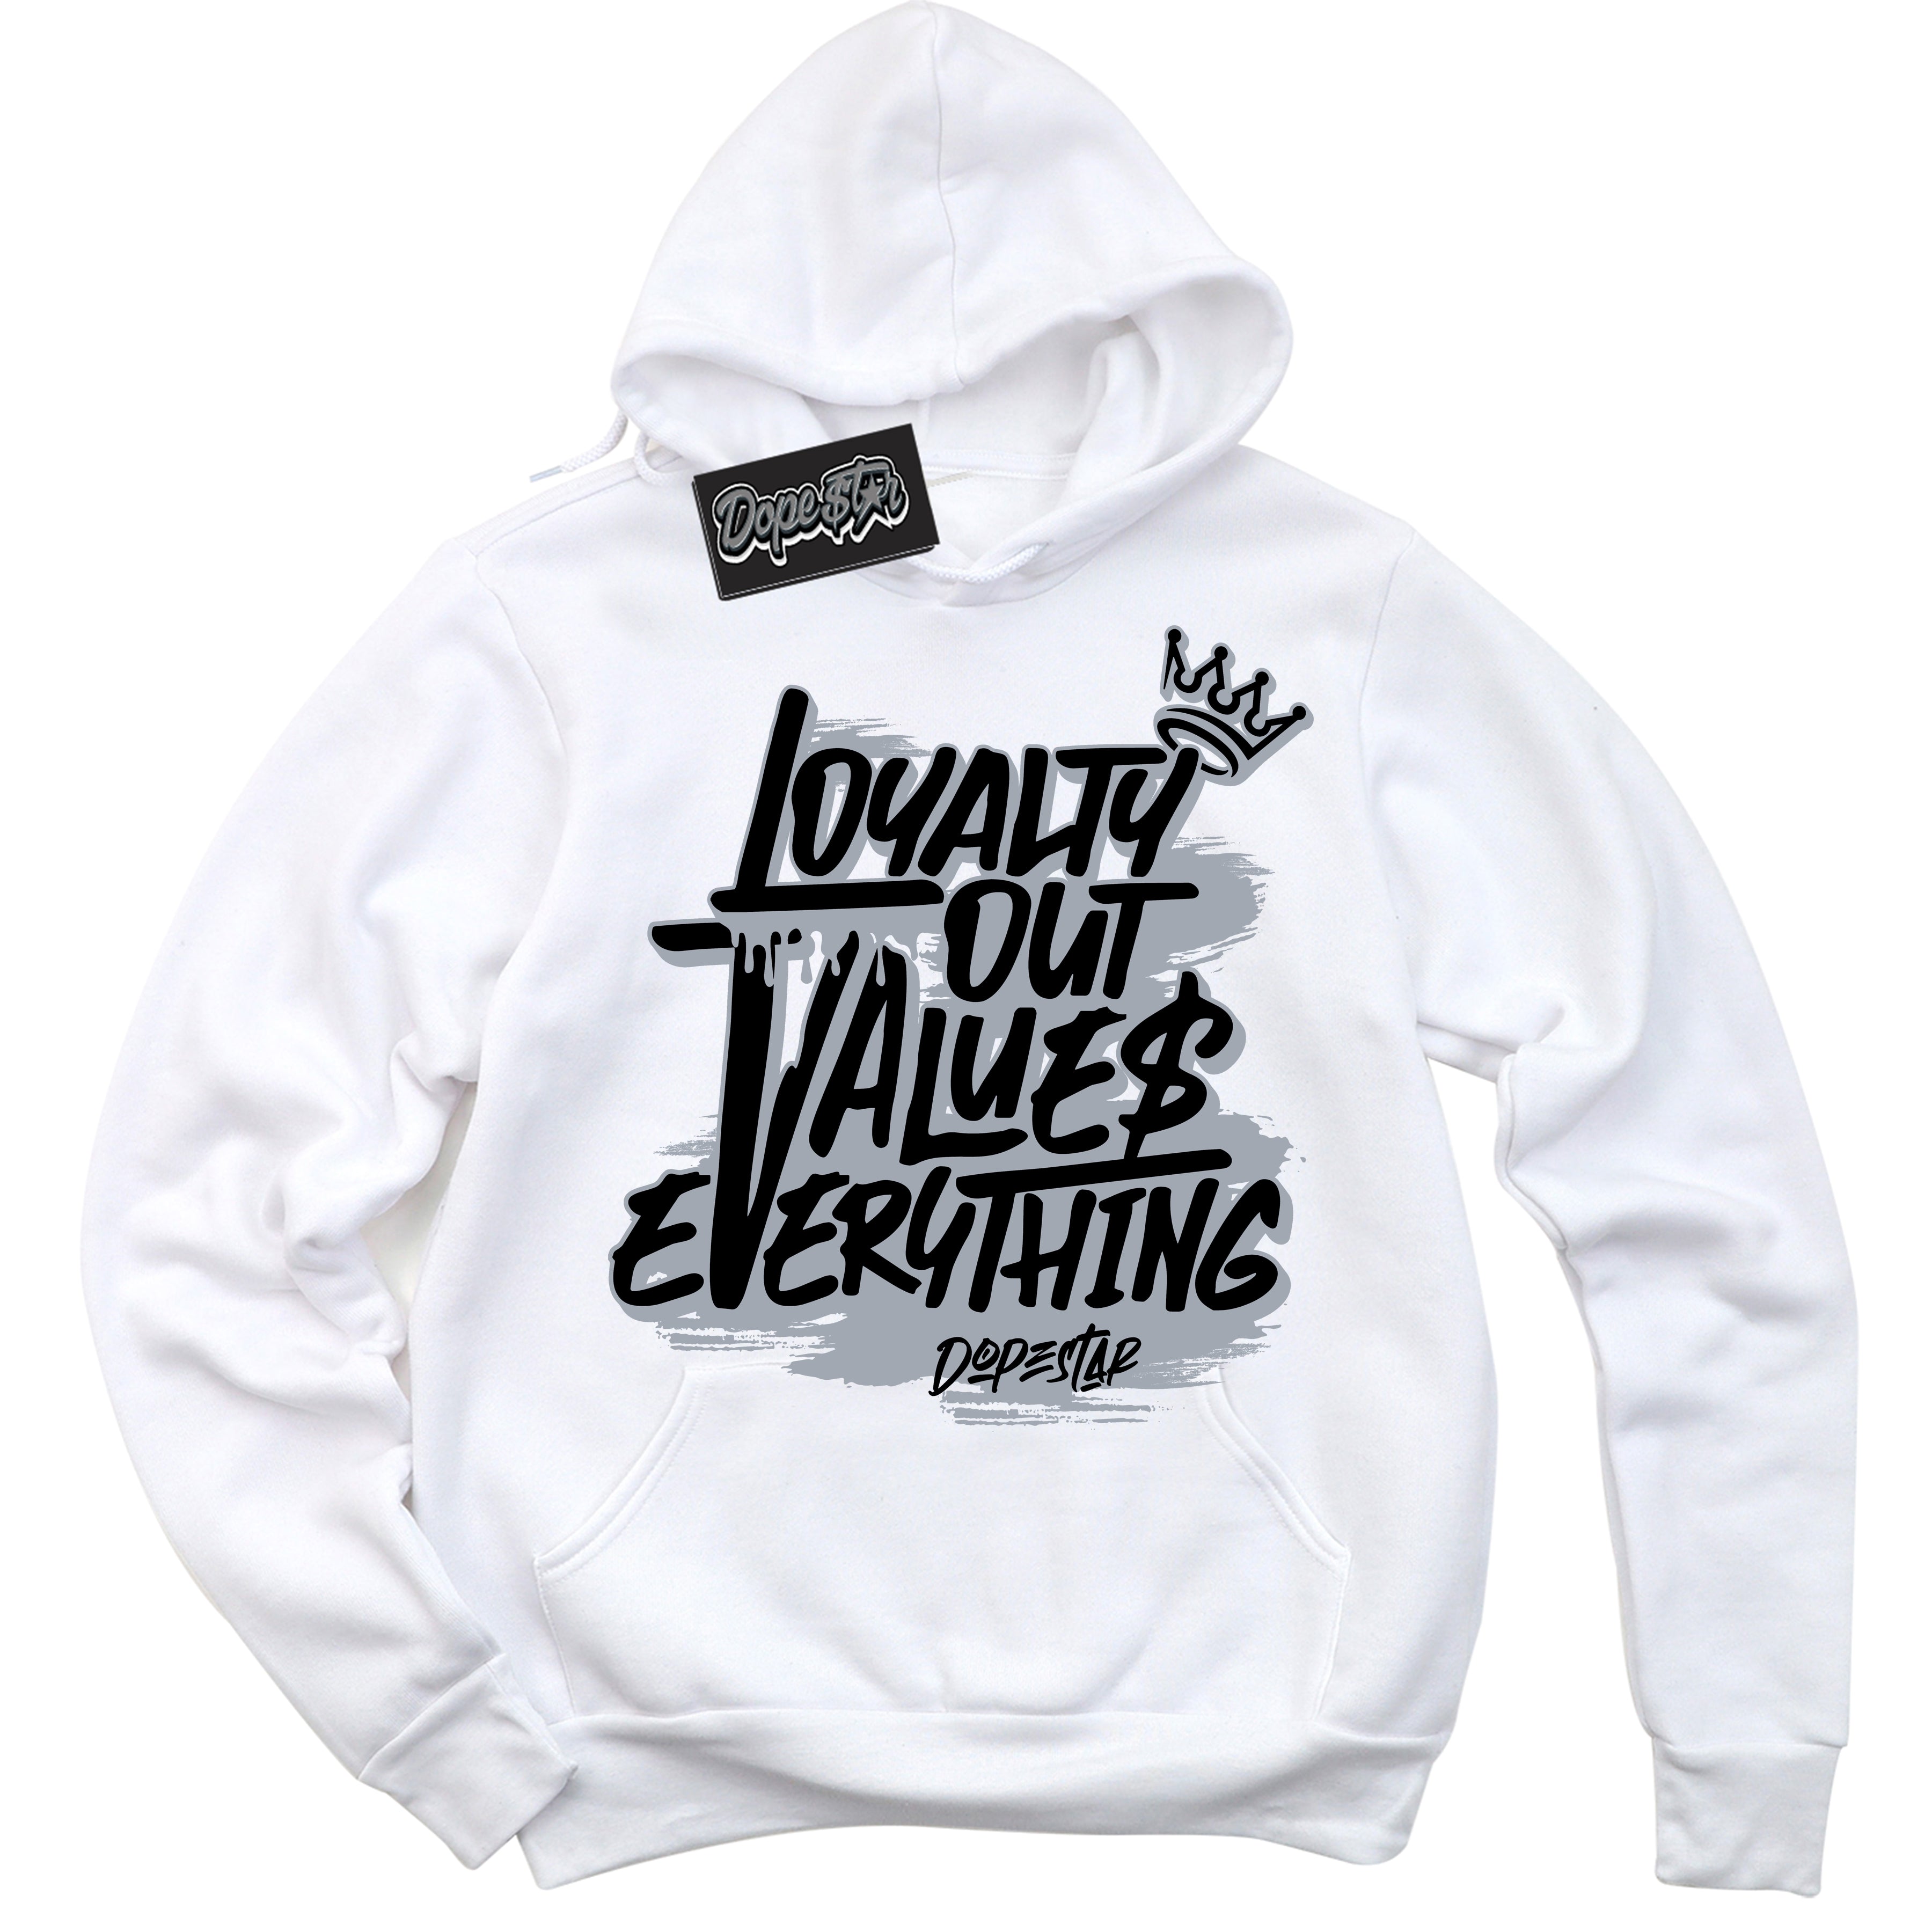 Cool White Hoodie with “ Loyalty Out Values Everything ”  design that Perfectly Matches The Kaws x Sky High Farm 1s Sneakers.